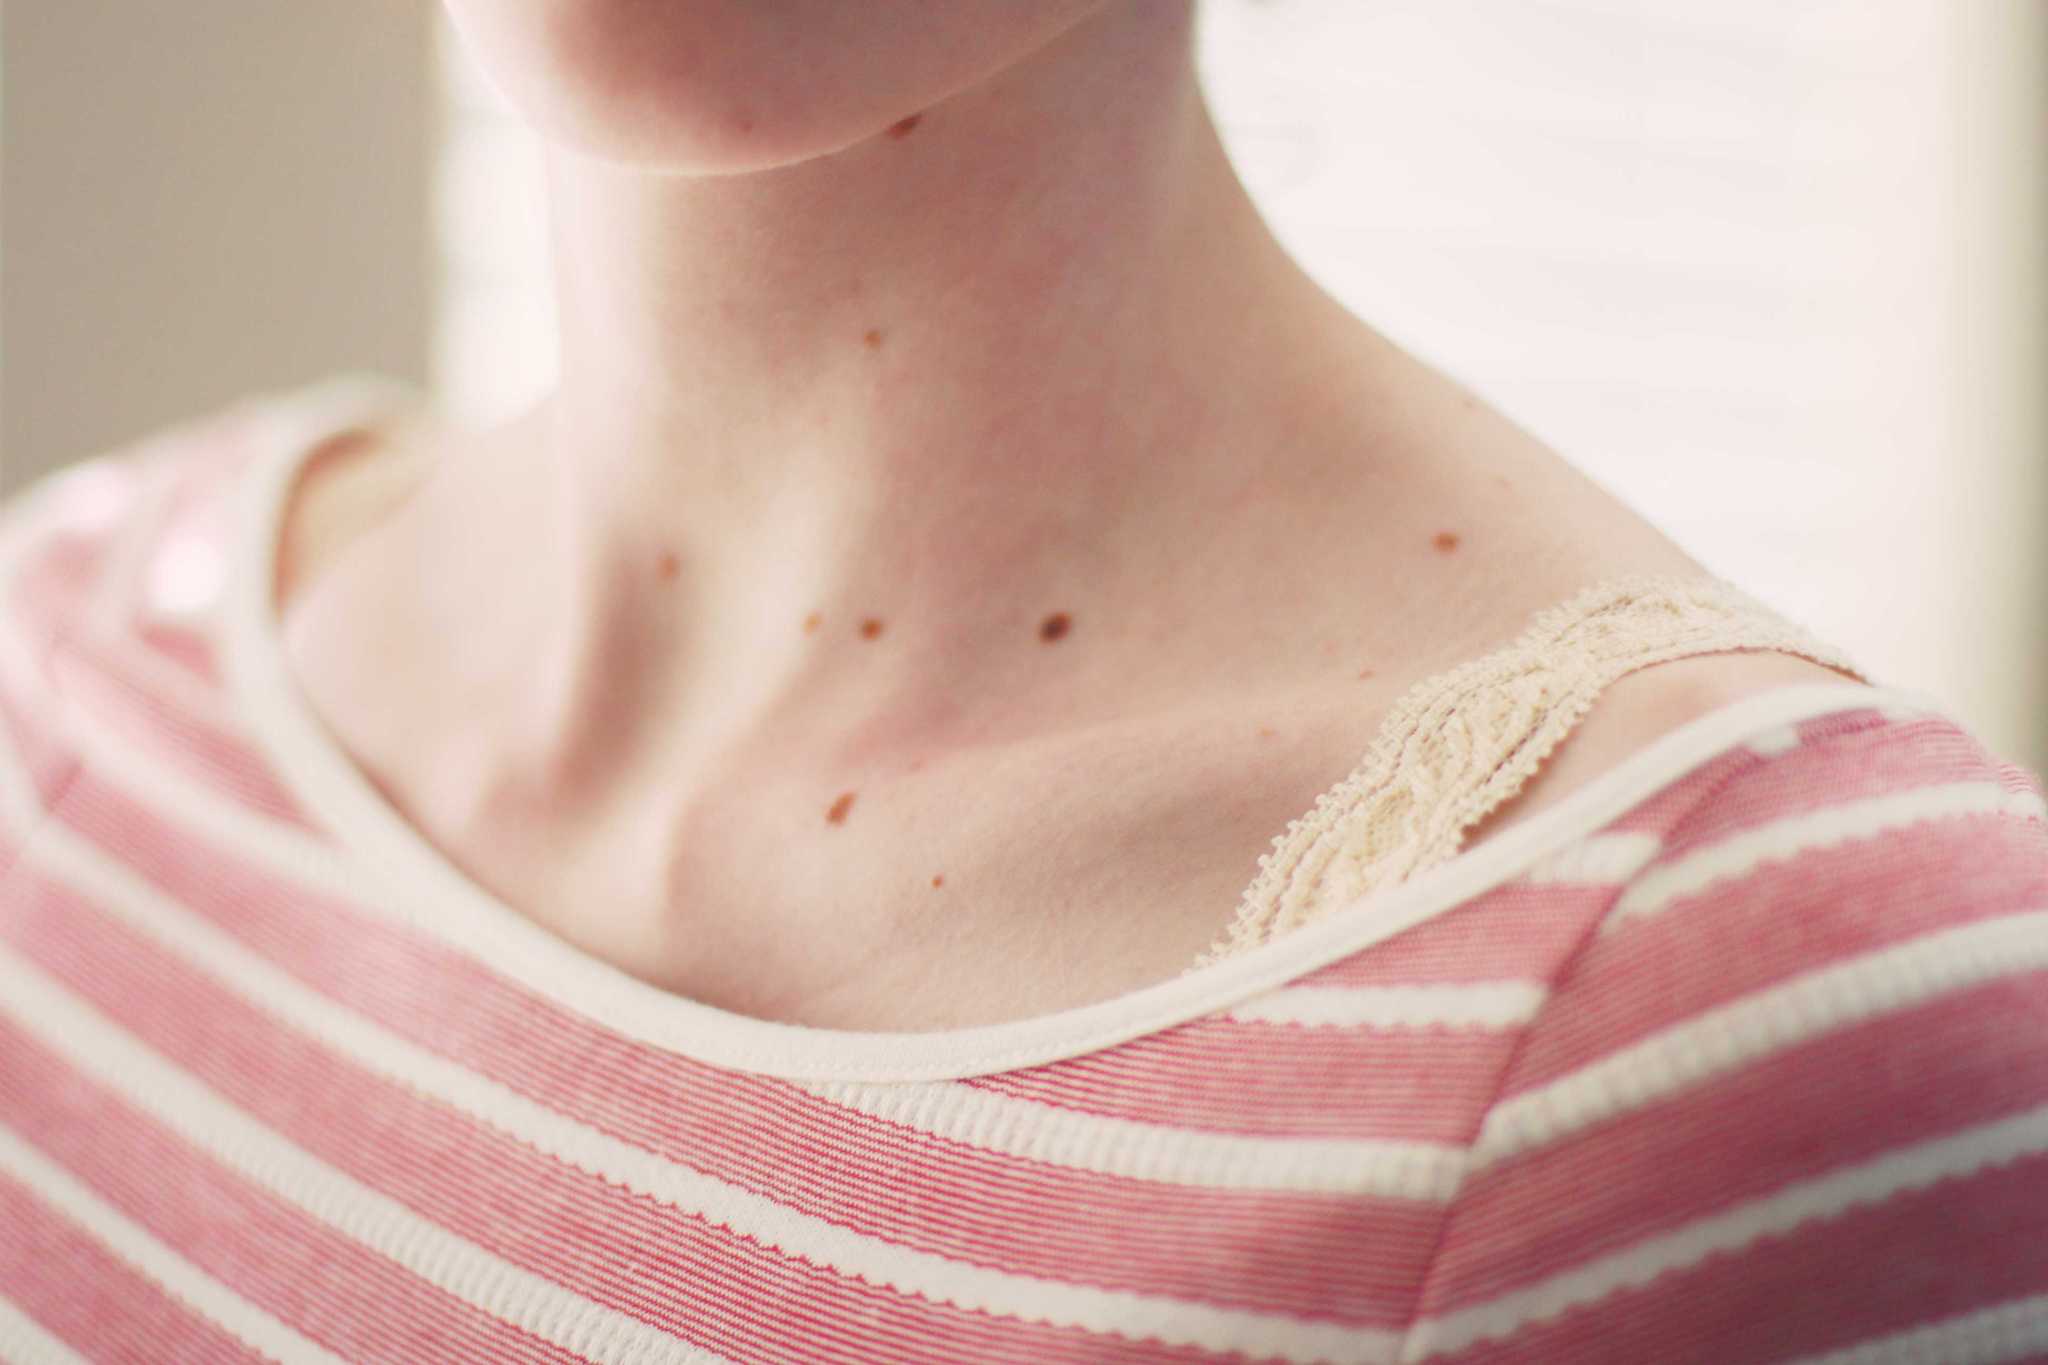 13 photos of skin spots and what caused them